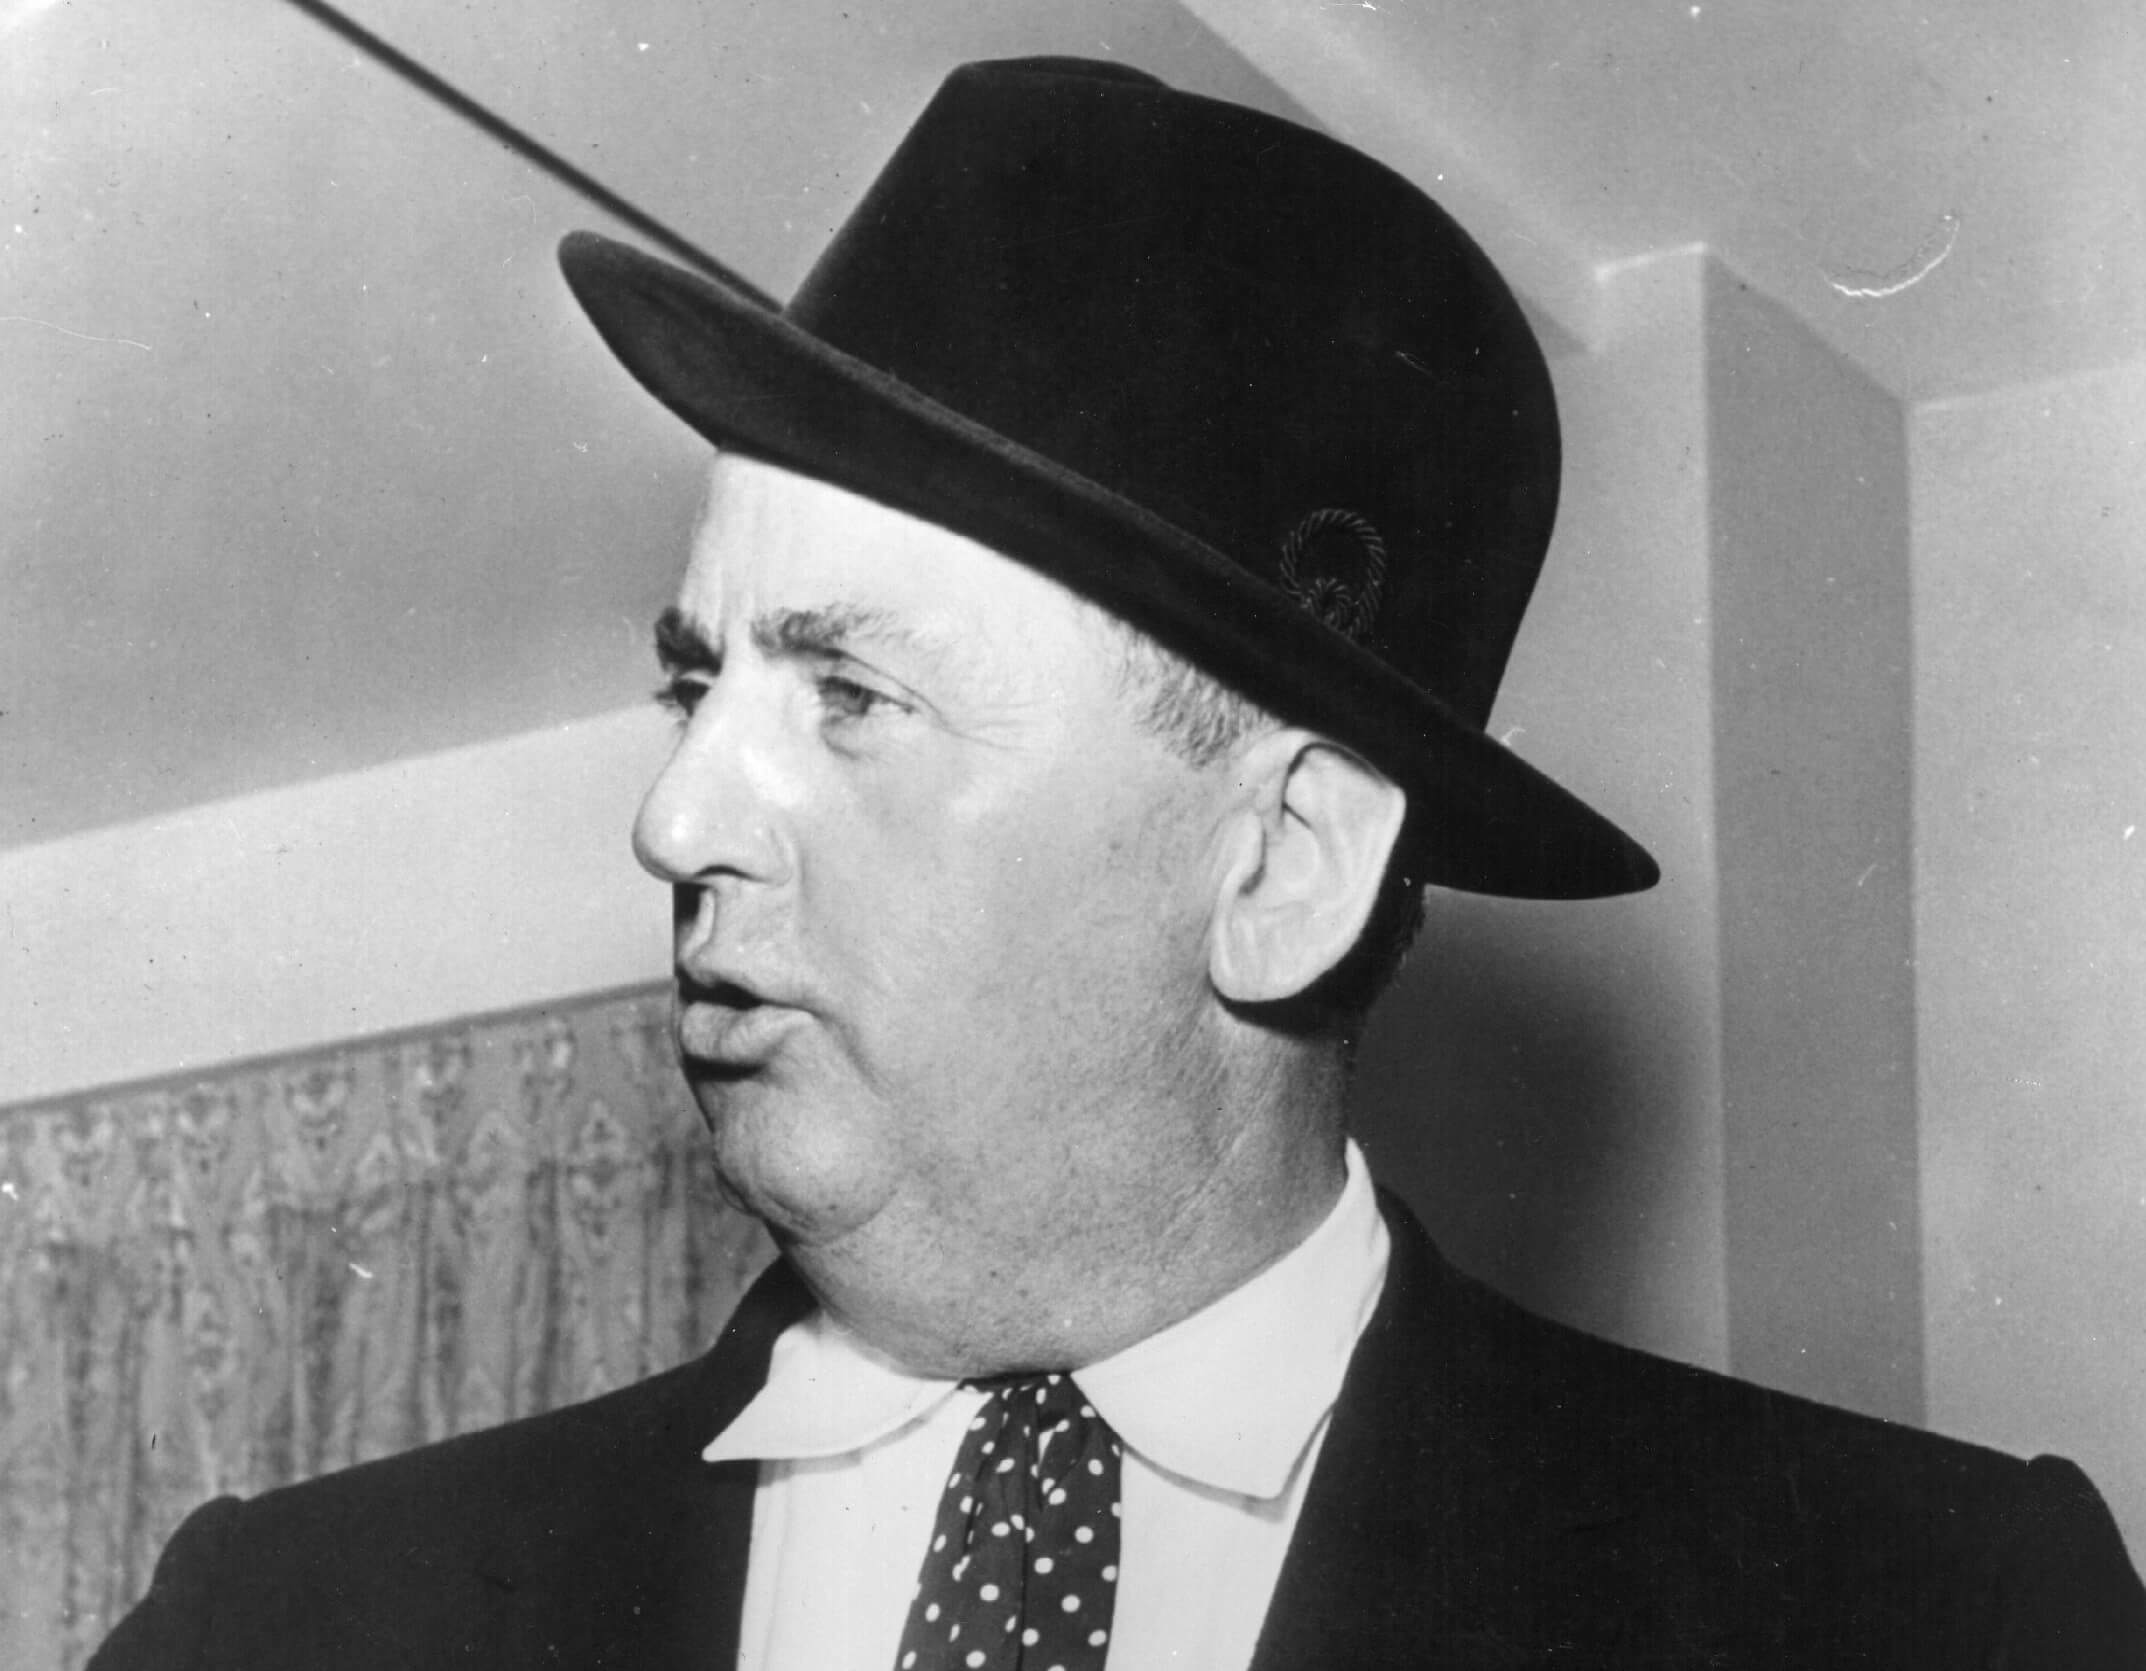 A black and white picture of Elvis' manager Tom Parker wearing a suit and bowler hat.